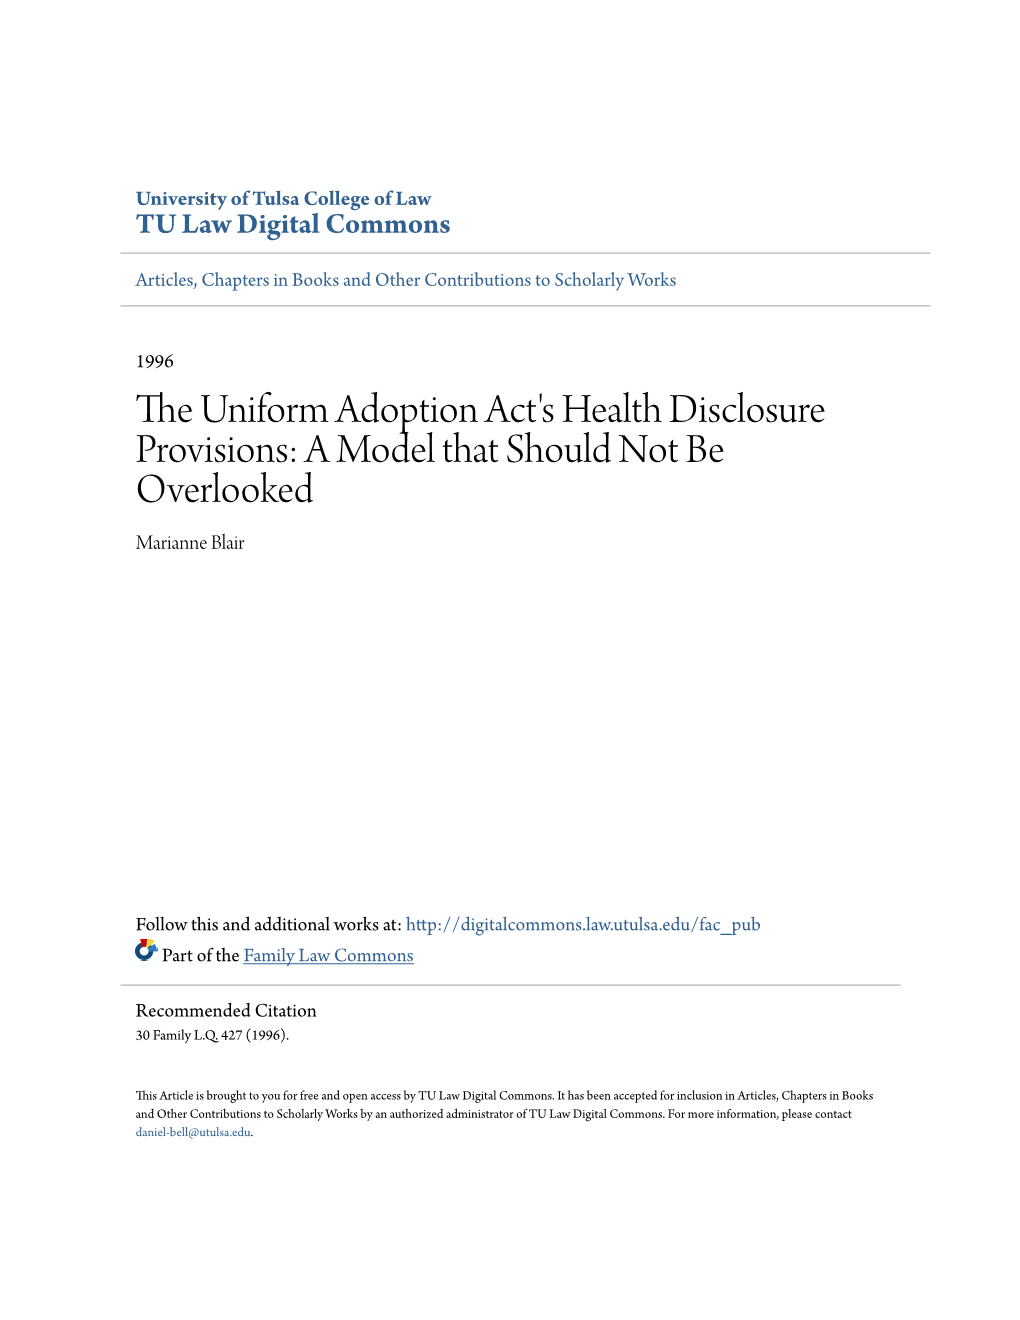 The Uniform Adoption Act's Health Disclosure Provisions: a Model That Should Not Be Overlooked